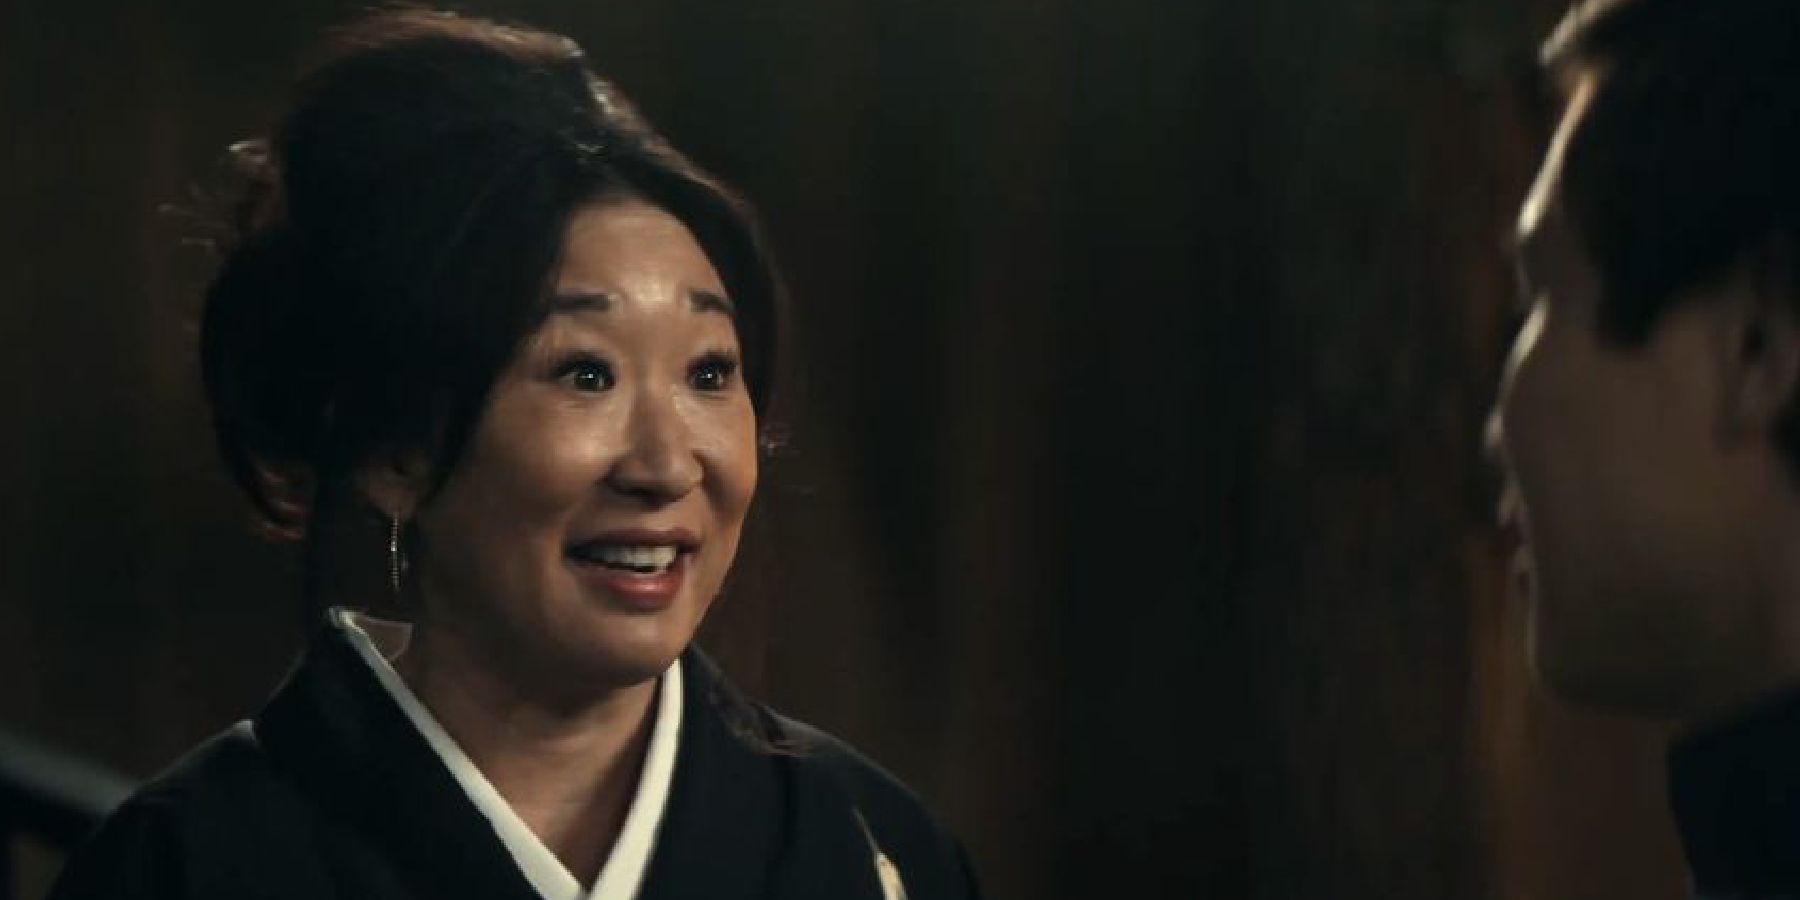 Sofia in traditional Japanese clothing in The Sympathizer